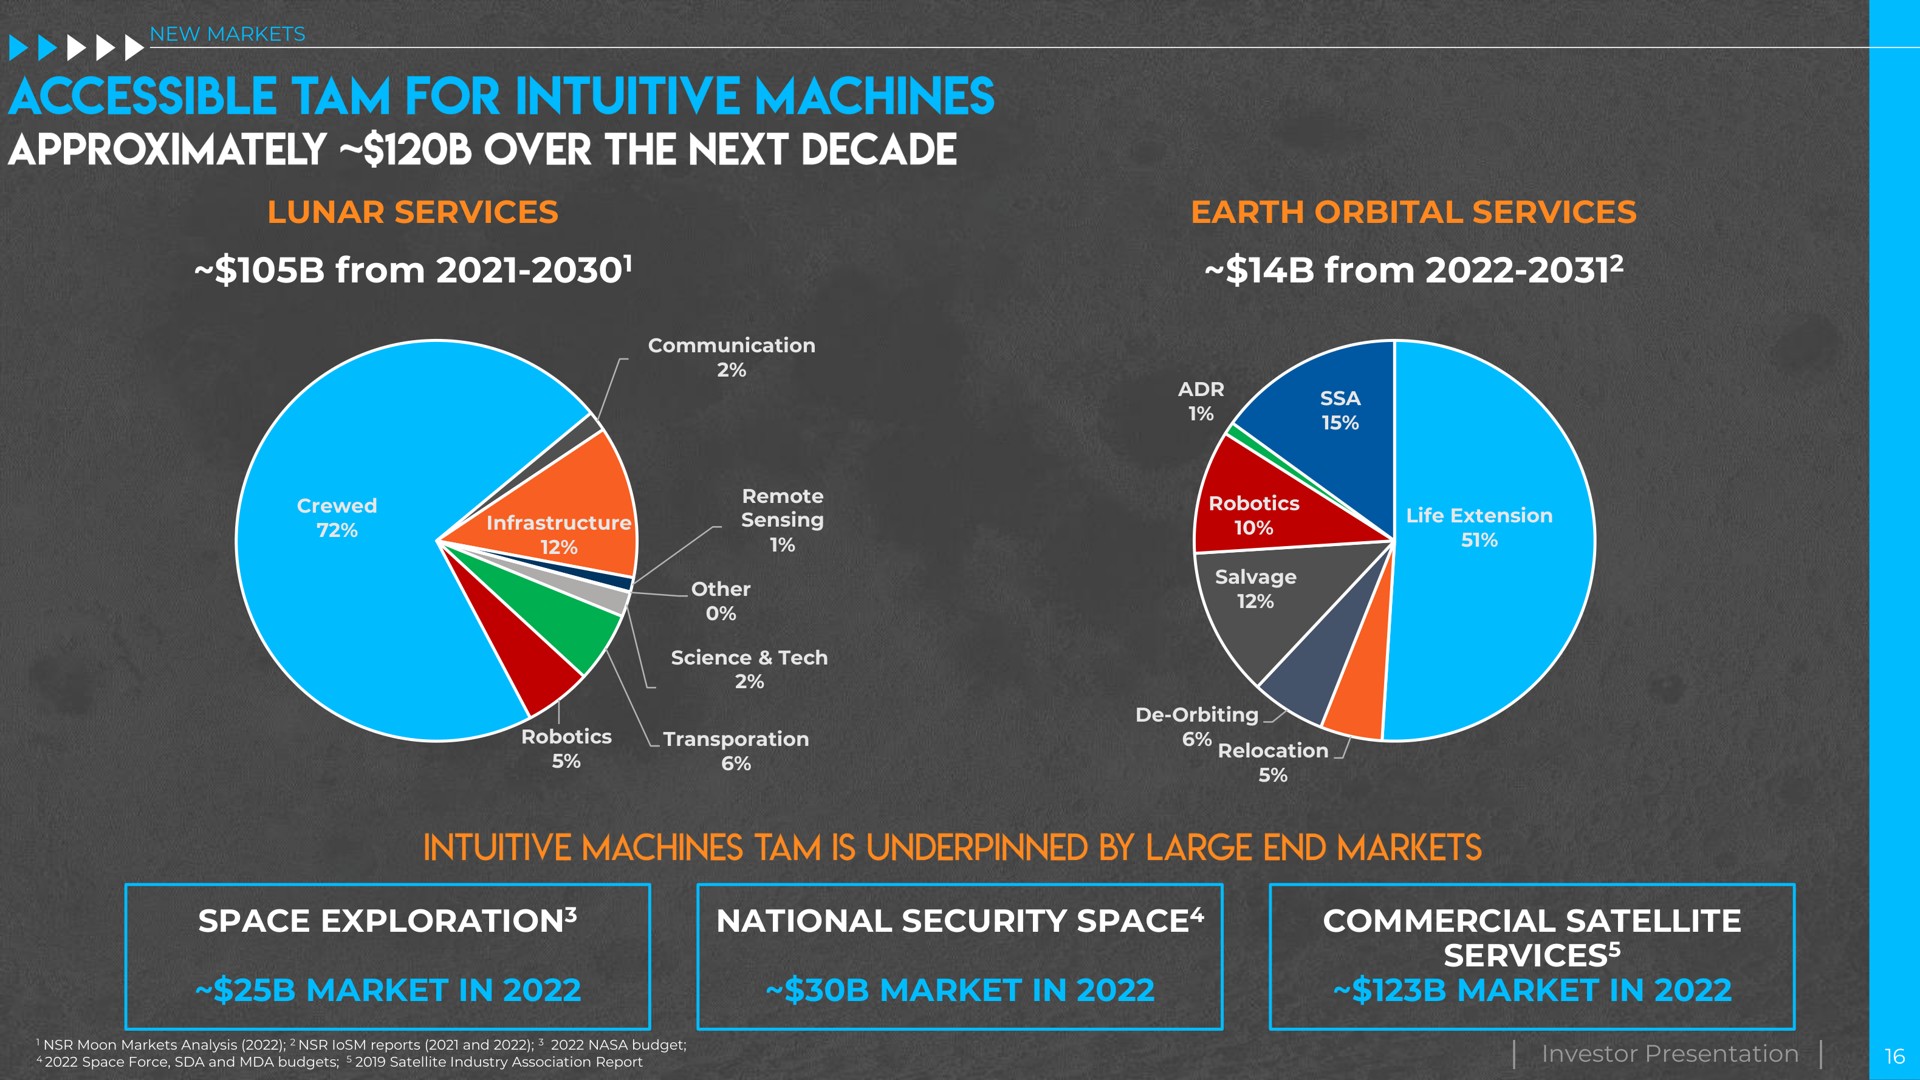 lunar services from earth orbital services from space exploration national security space market in market in commercial satellite services market in investor presentation accessible tam for intuitive machines approximately over the next decade intuitive machines tam is underpinned by large end markets | Intuitive Machines